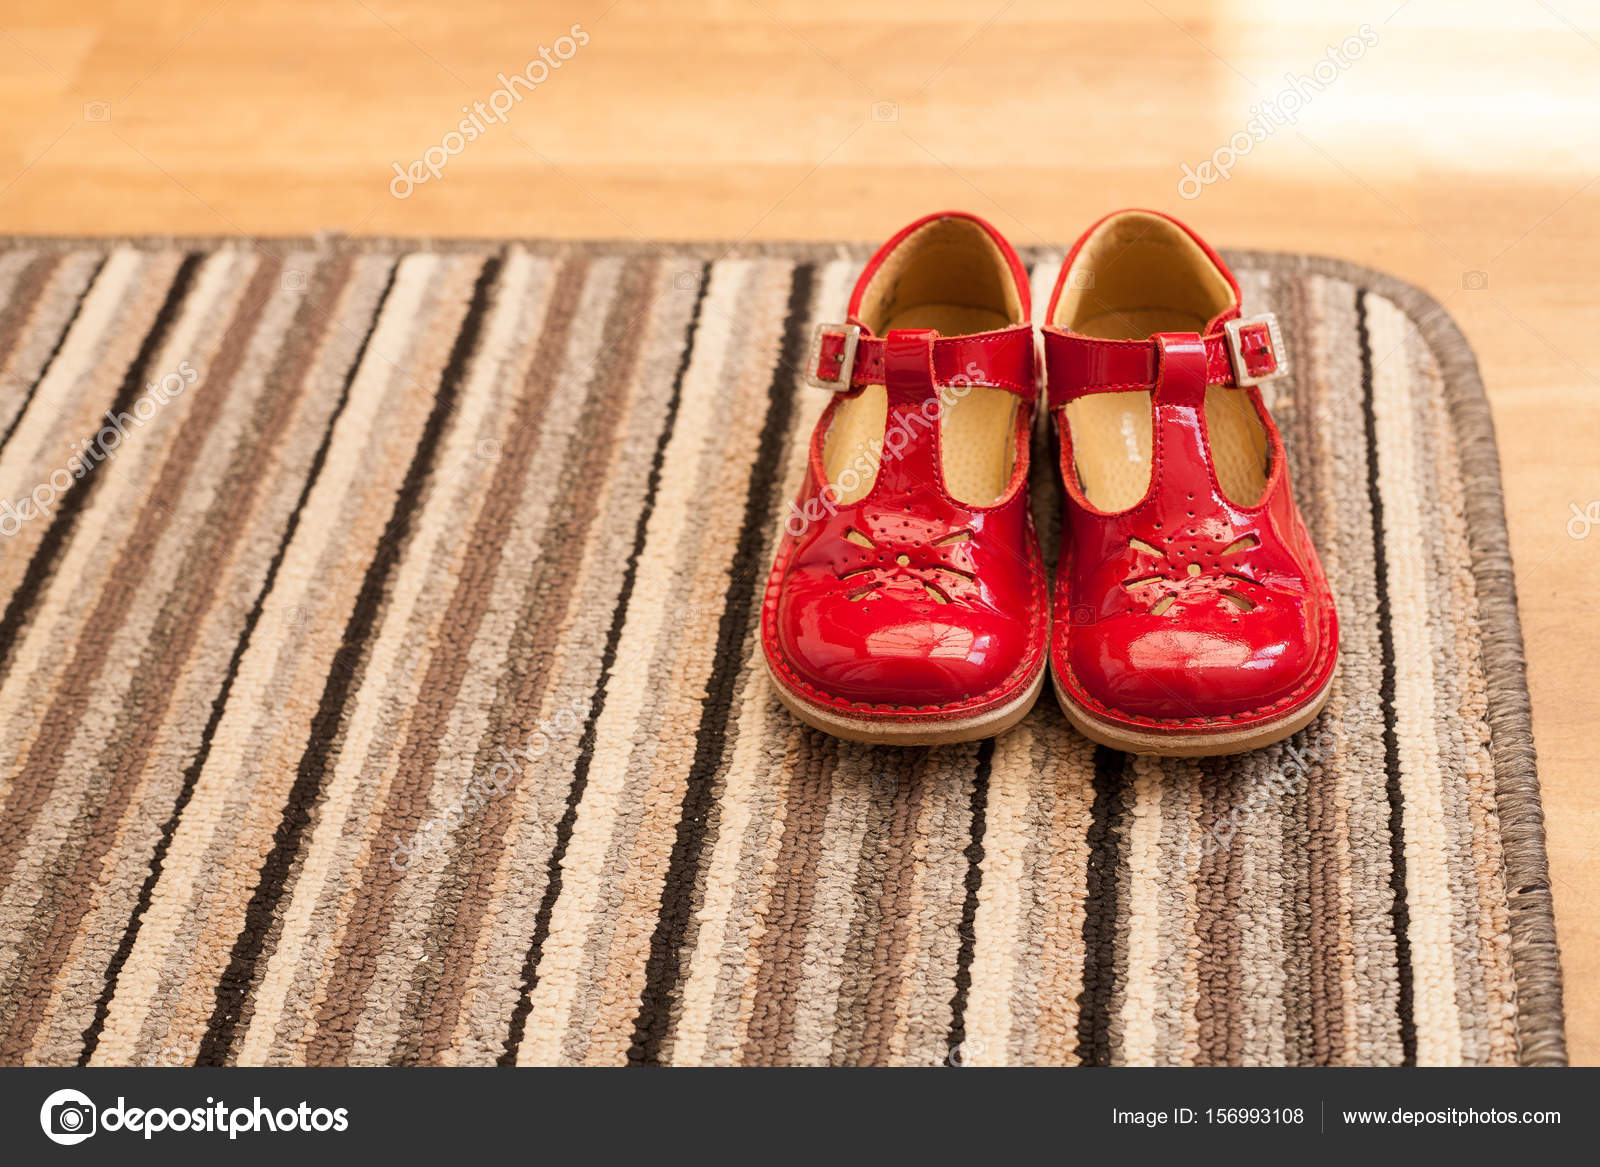 Child's red shoes — Stock Photo 